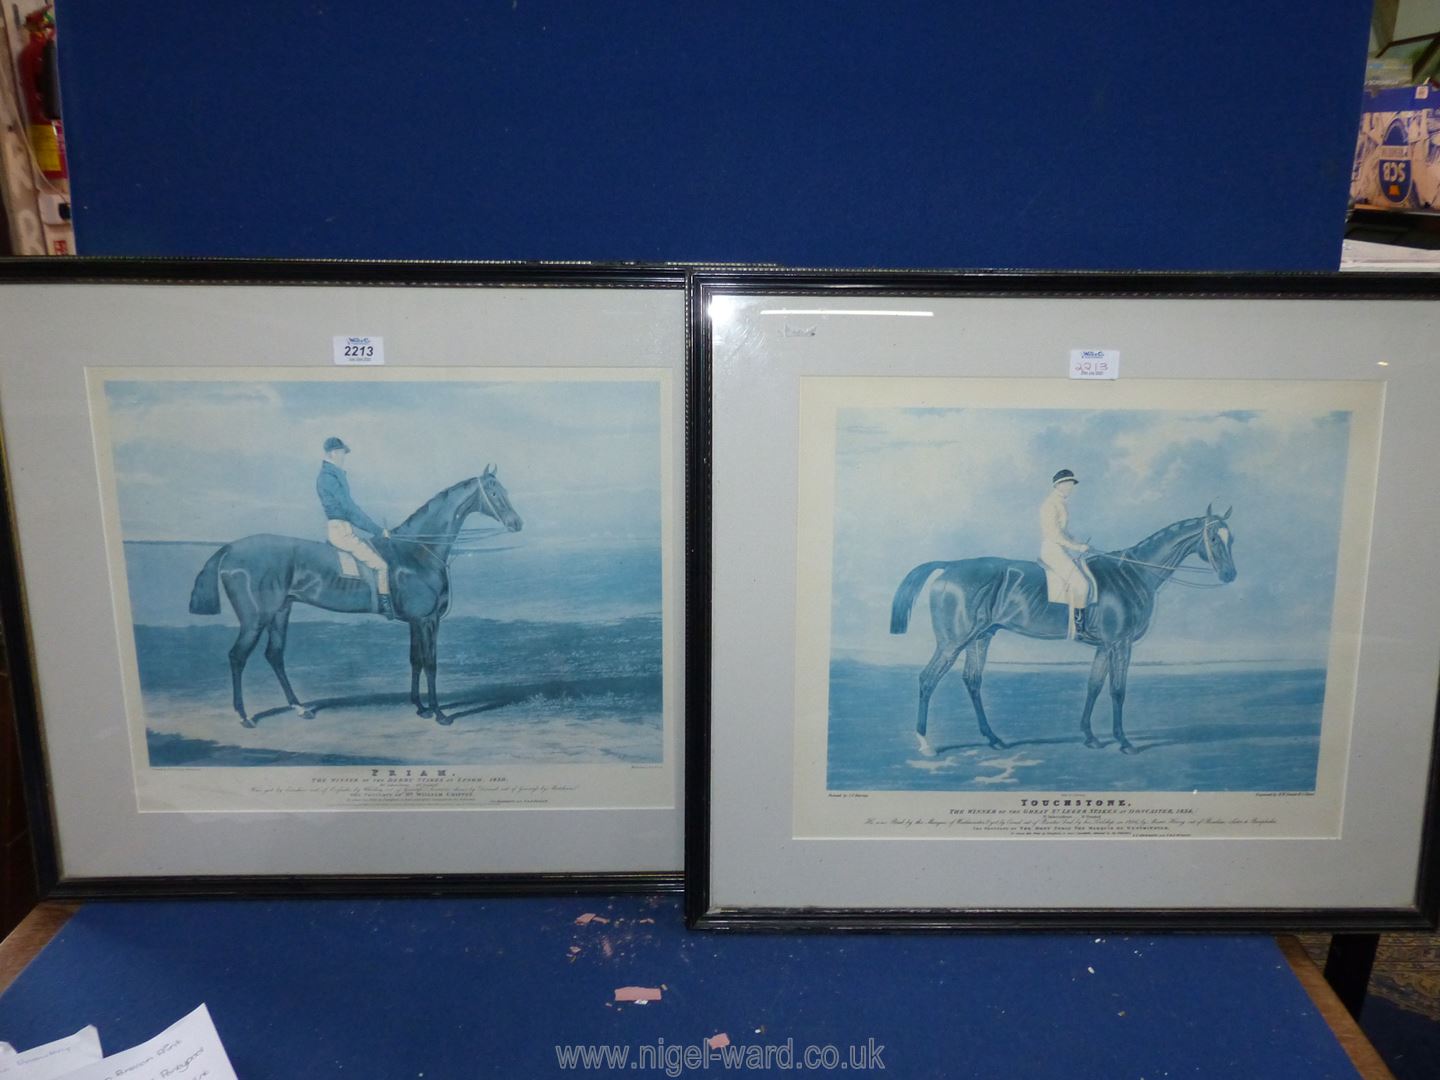 A large Print of the 1830 Epsom Derby Winner 'Priam' by J.F. - Image 4 of 4